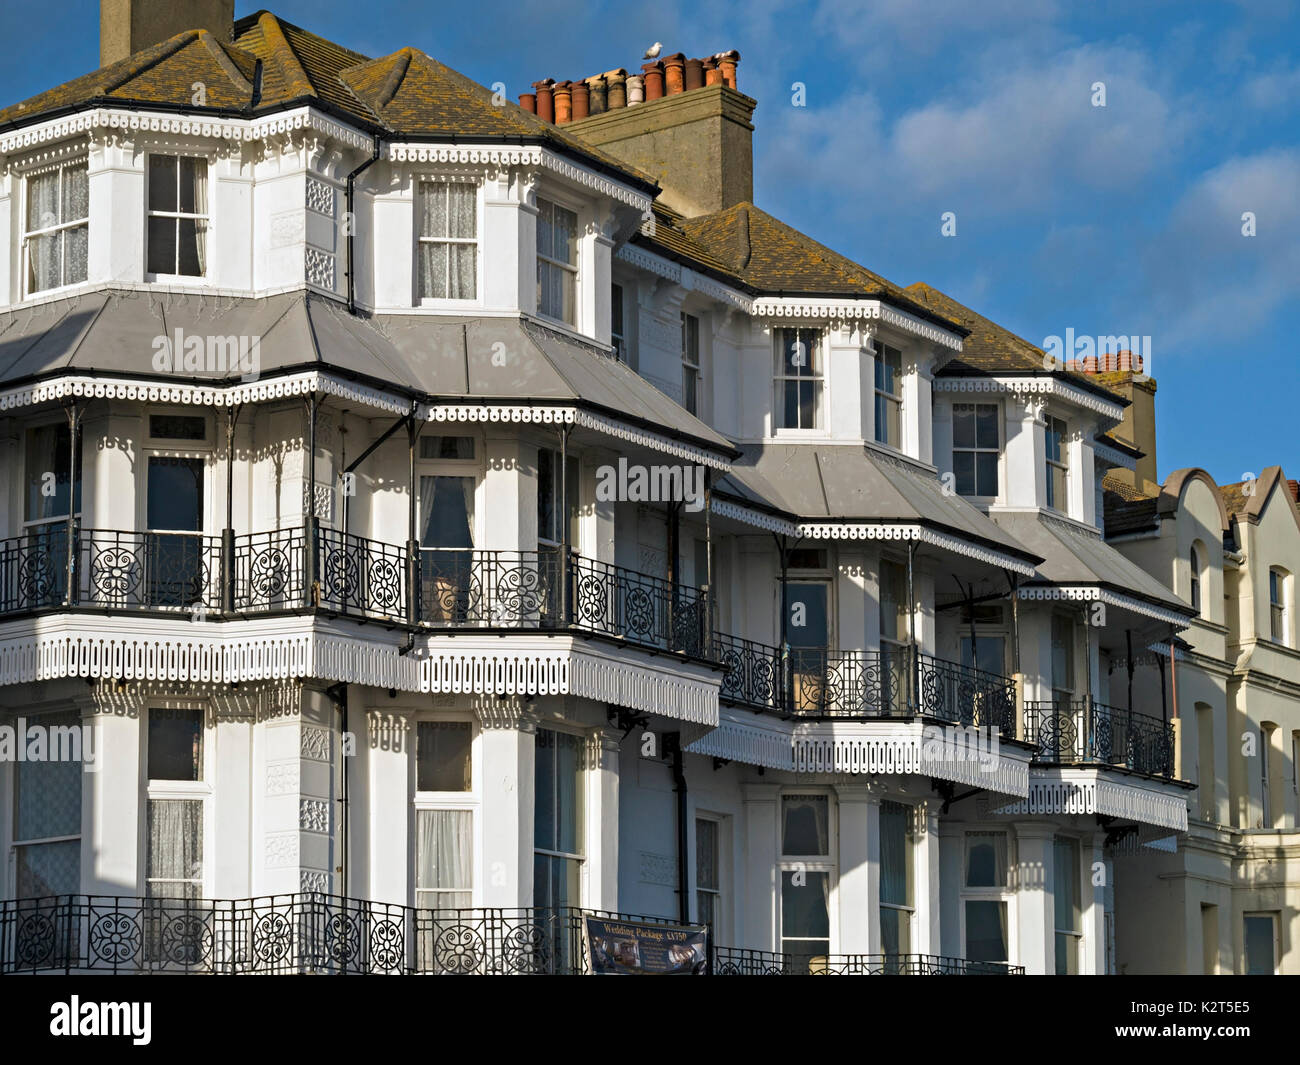 Ornate Victorian balconies, wrought iron balustrade railings and architecture, East Beach Hotel, Eastbourne Royal Parade, East Sussex, England, UK. Stock Photo